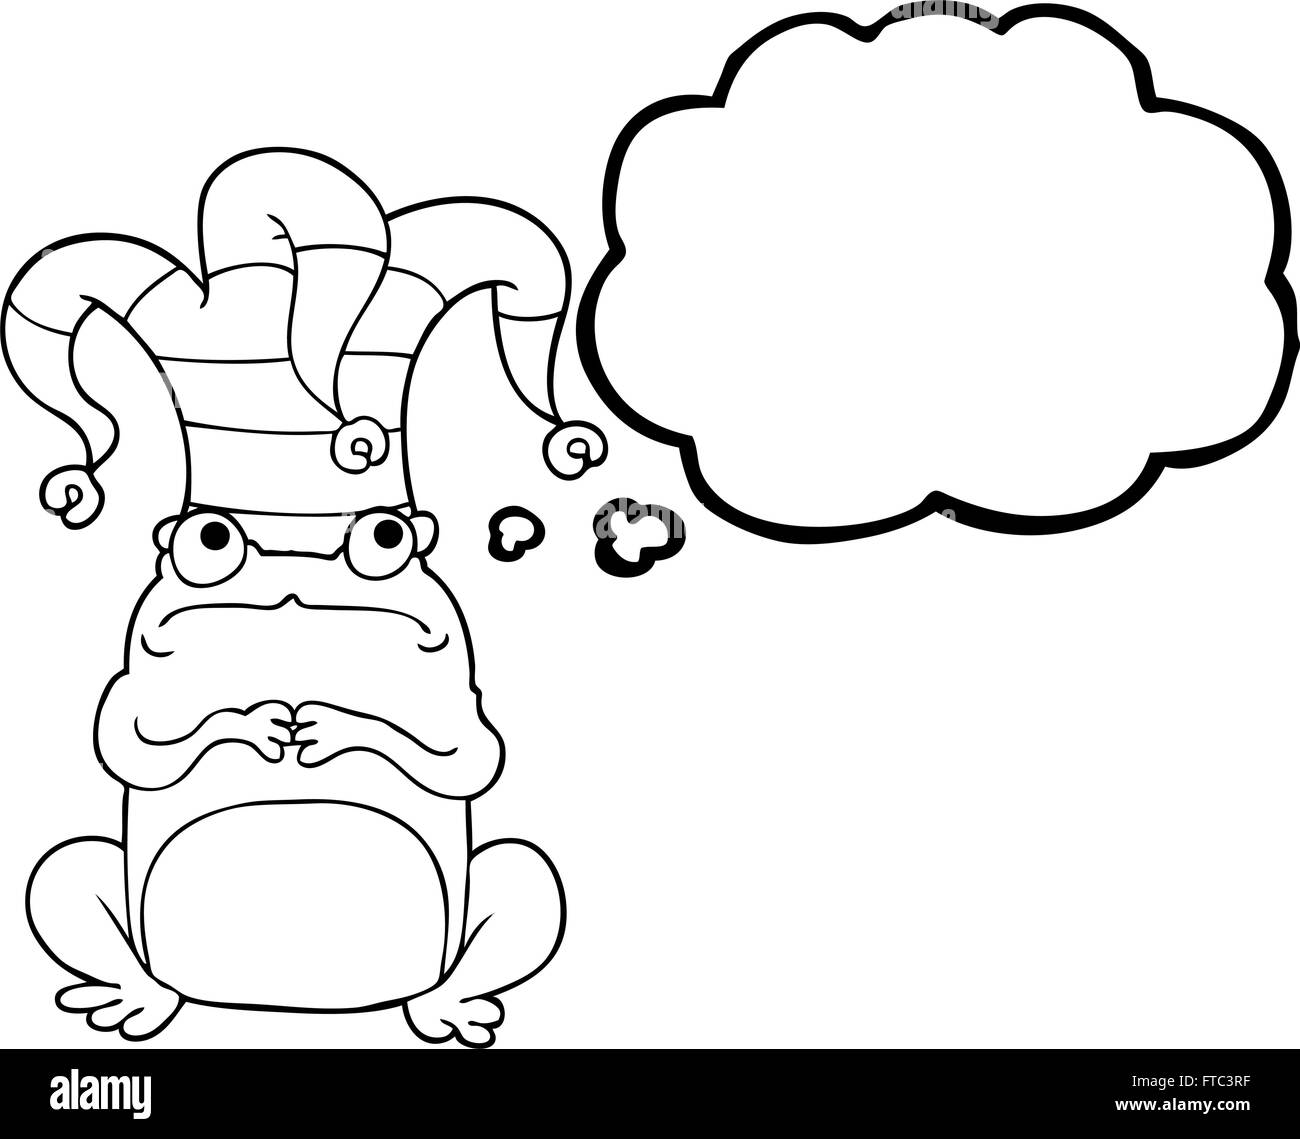 freehand drawn thought bubble cartoon frog wearing jester hat Stock Vector